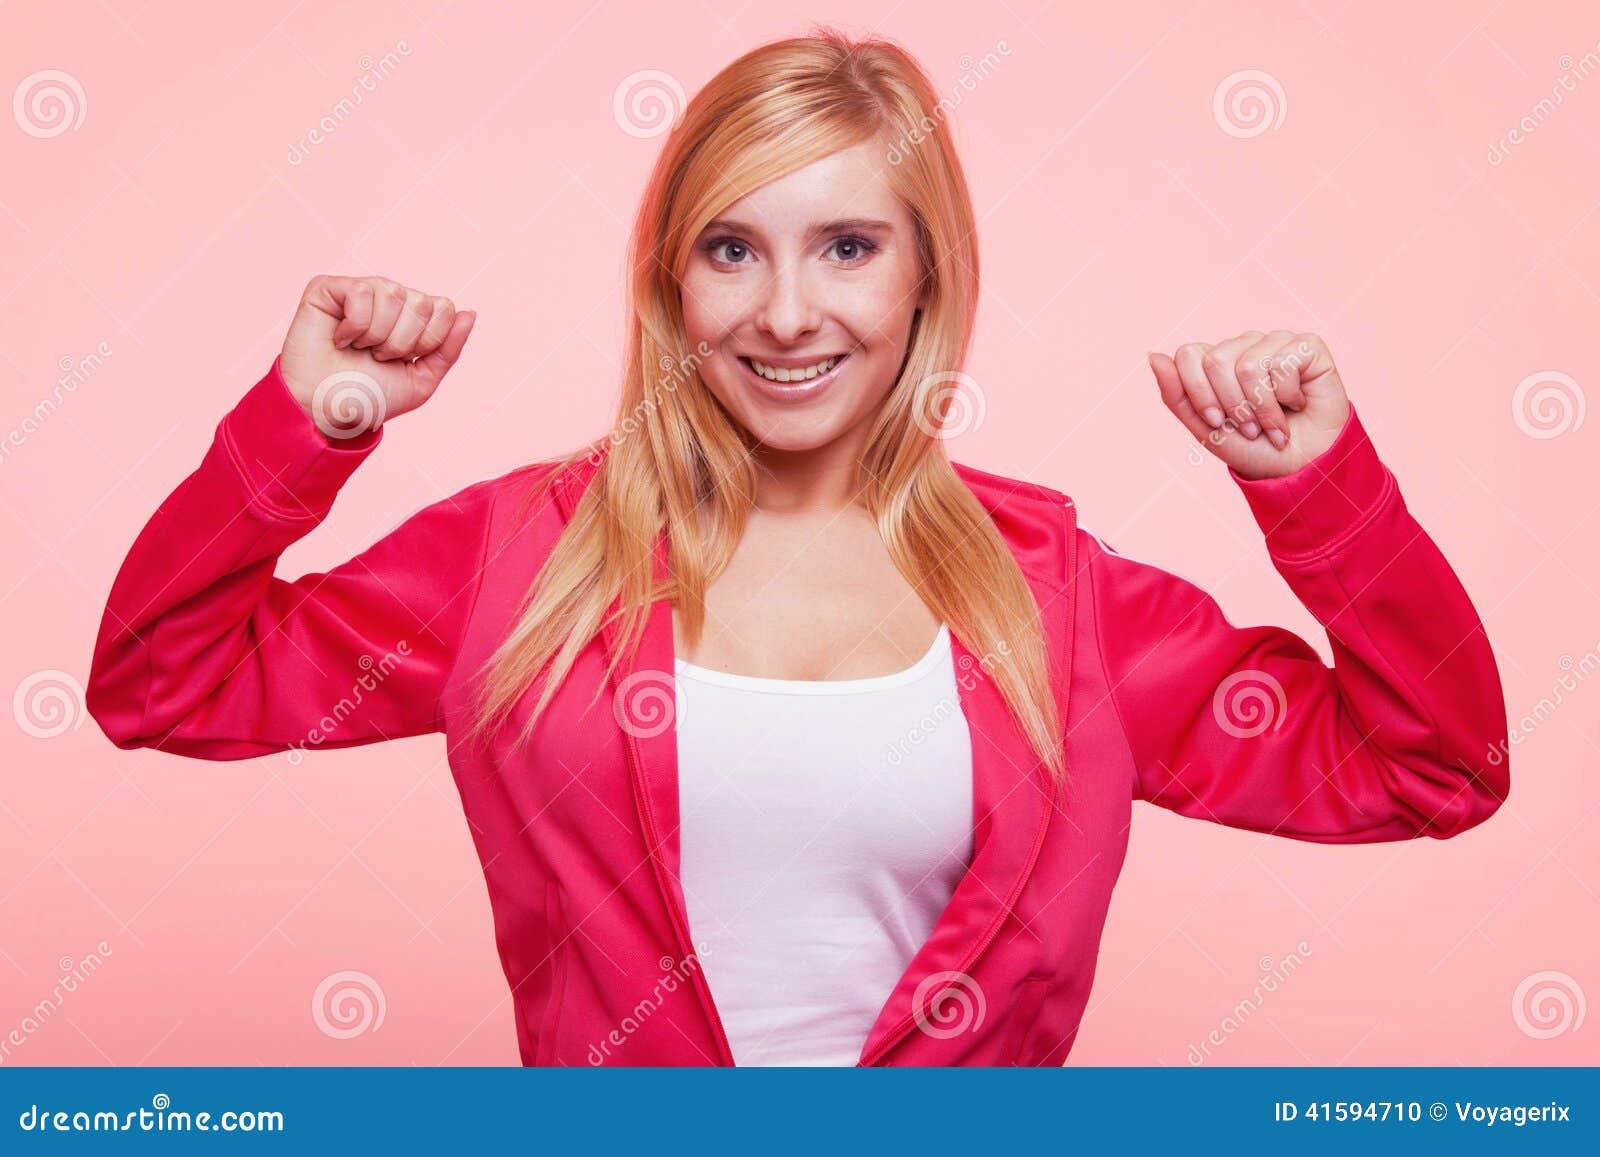 Beautiful Slim Smiling Girl Shows Biceps Isolated On White Stock Photo,  Picture and Royalty Free Image. Image 27593154.